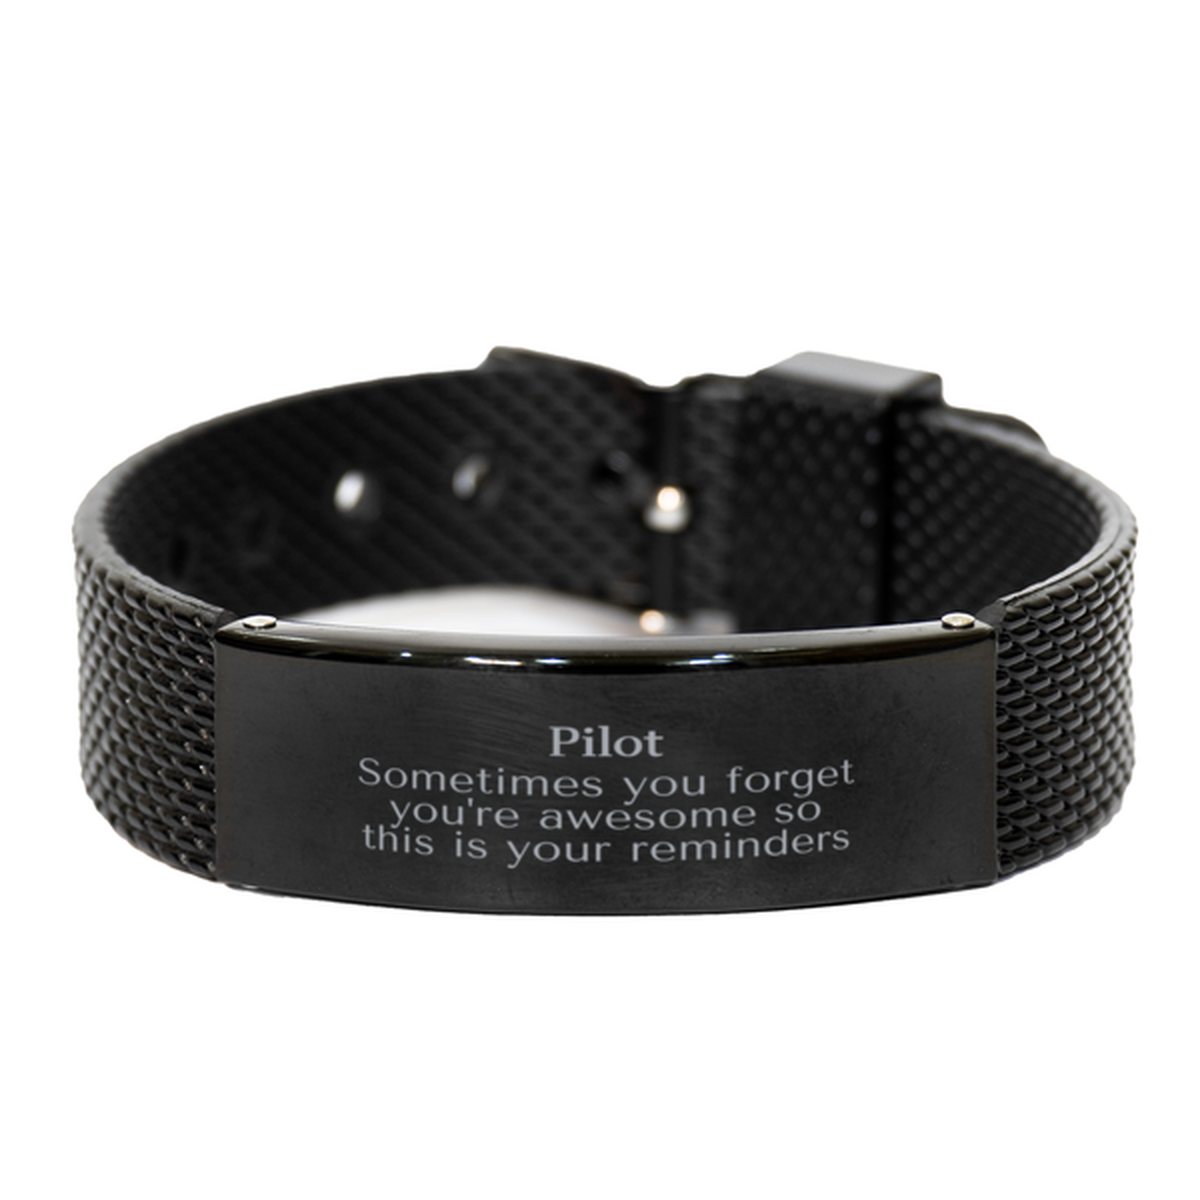 Sentimental Pilot Black Shark Mesh Bracelet, Pilot Sometimes you forget you're awesome so this is your reminders, Graduation Christmas Birthday Gifts for Pilot, Men, Women, Coworkers